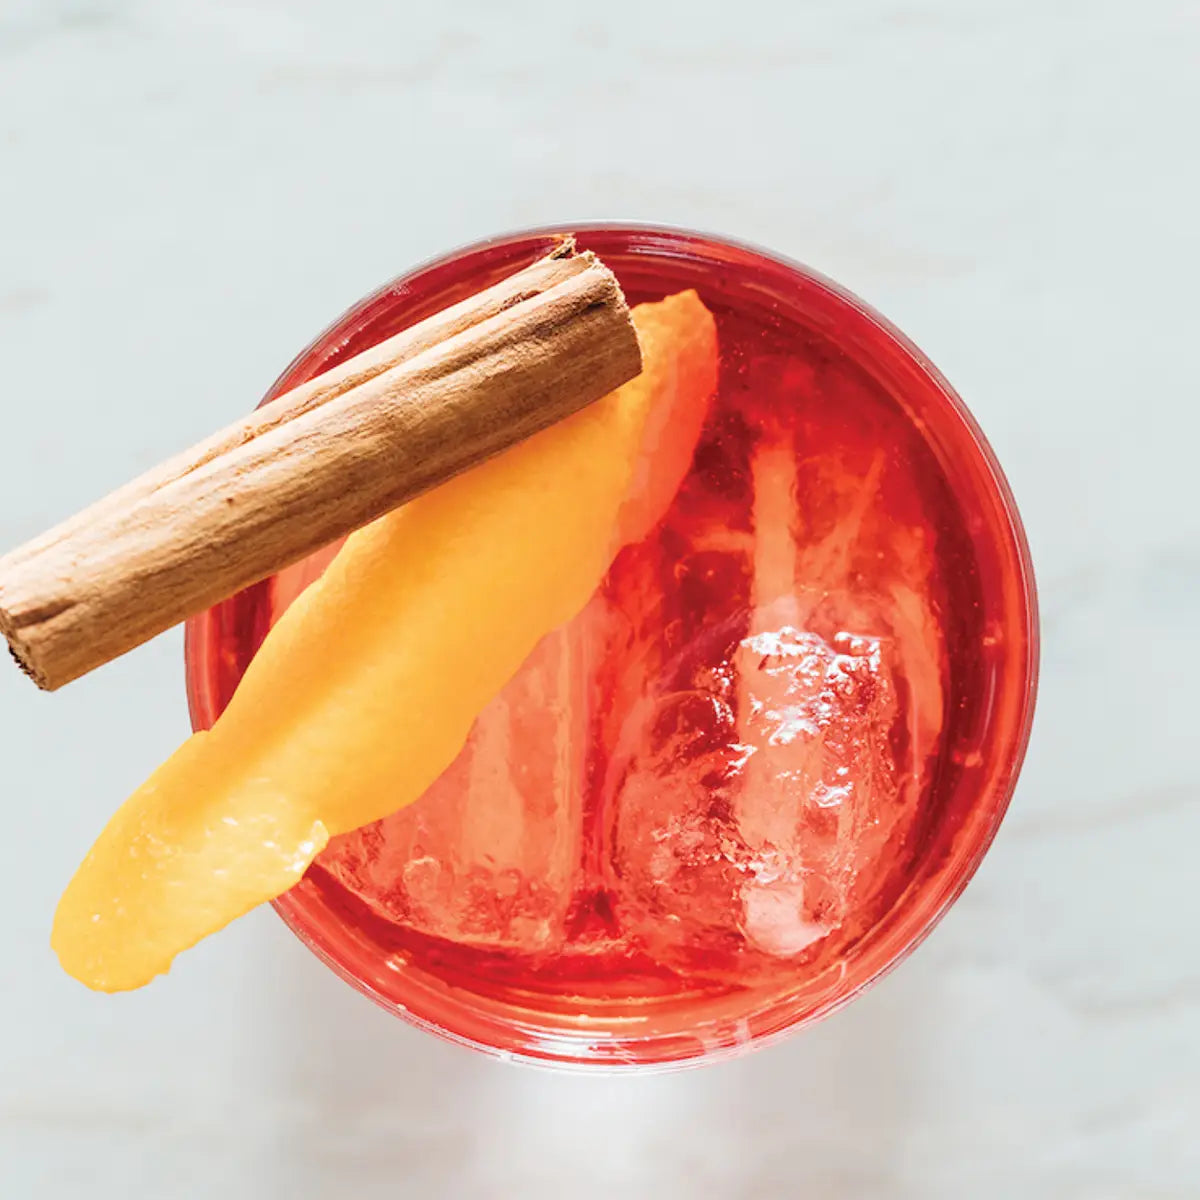 Cinnamon Negroni Cocktail Infusion Pack